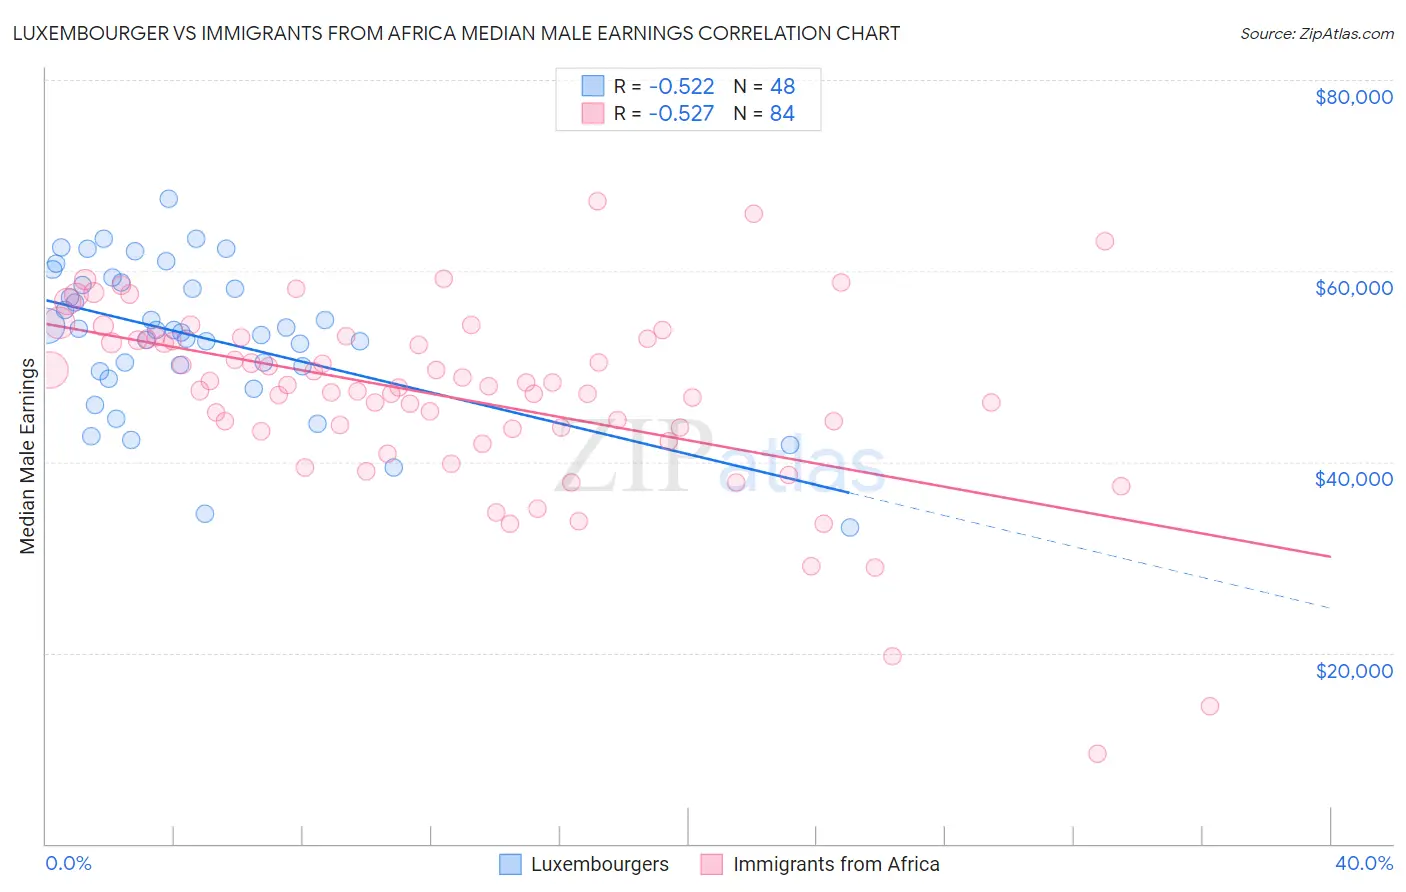 Luxembourger vs Immigrants from Africa Median Male Earnings